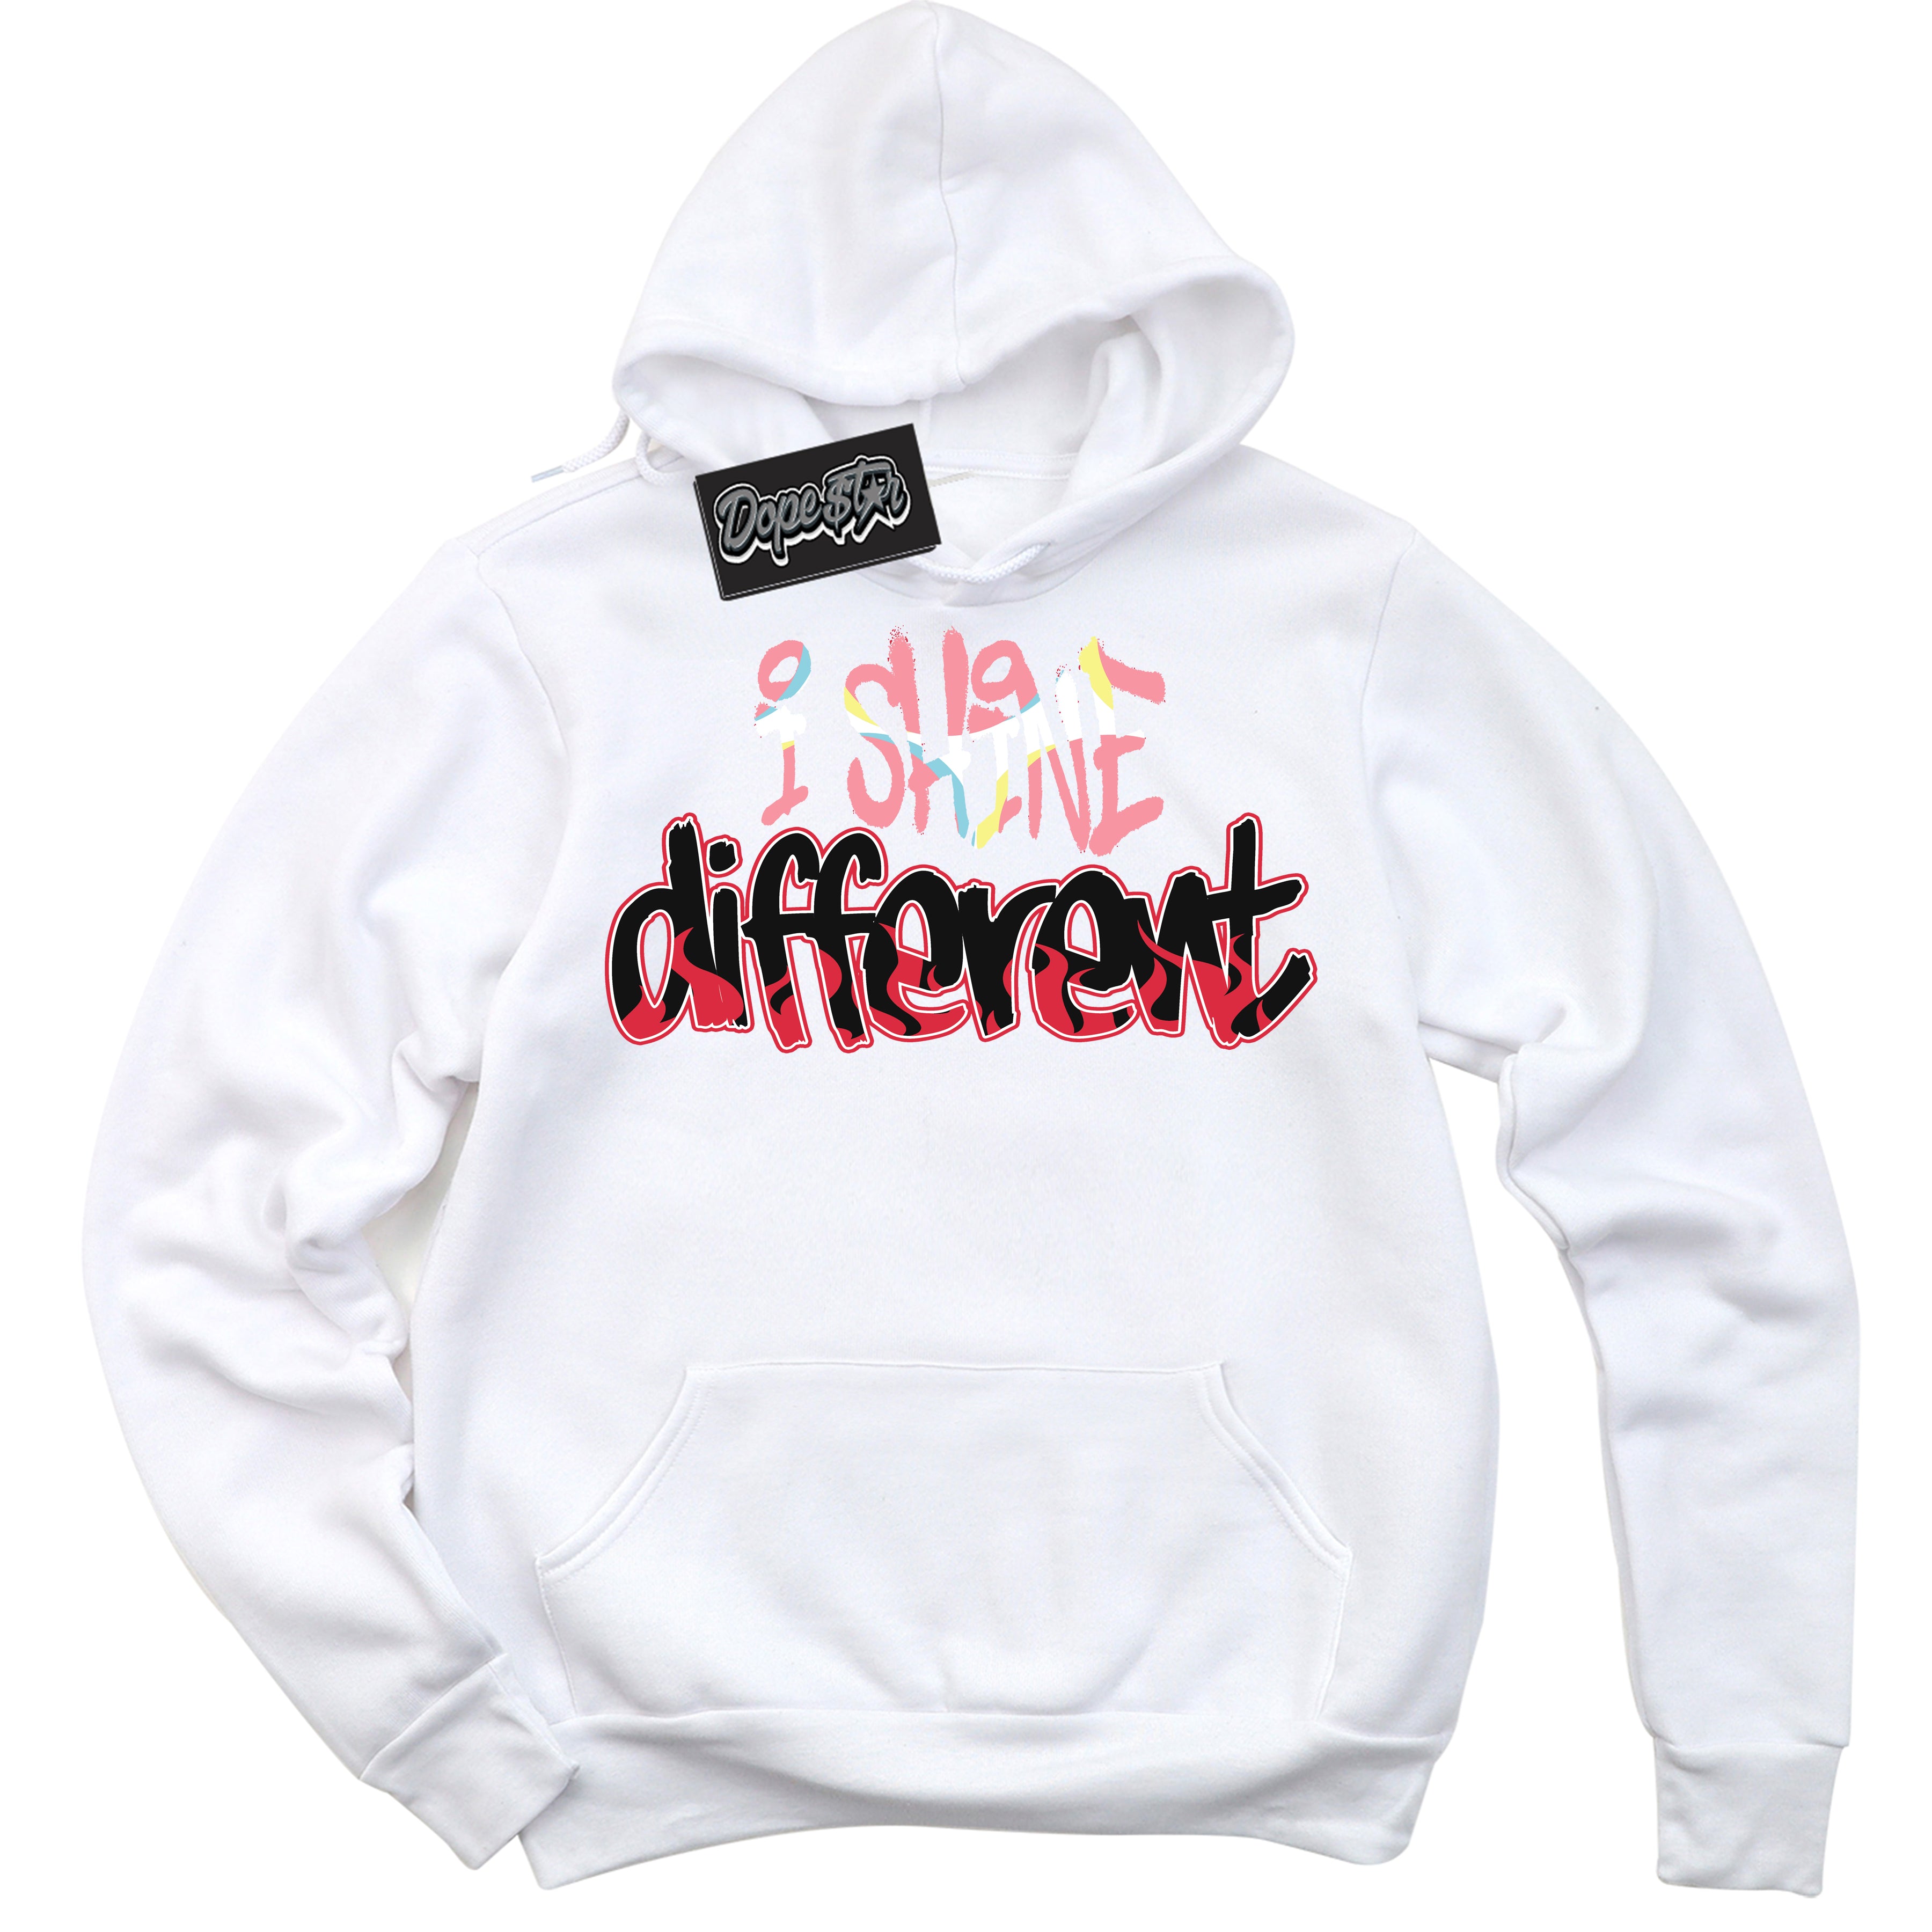 Cool White Graphic DopeStar Hoodie with “ I Shine Different “ print, that perfectly matches Spider-Verse 1s sneakers